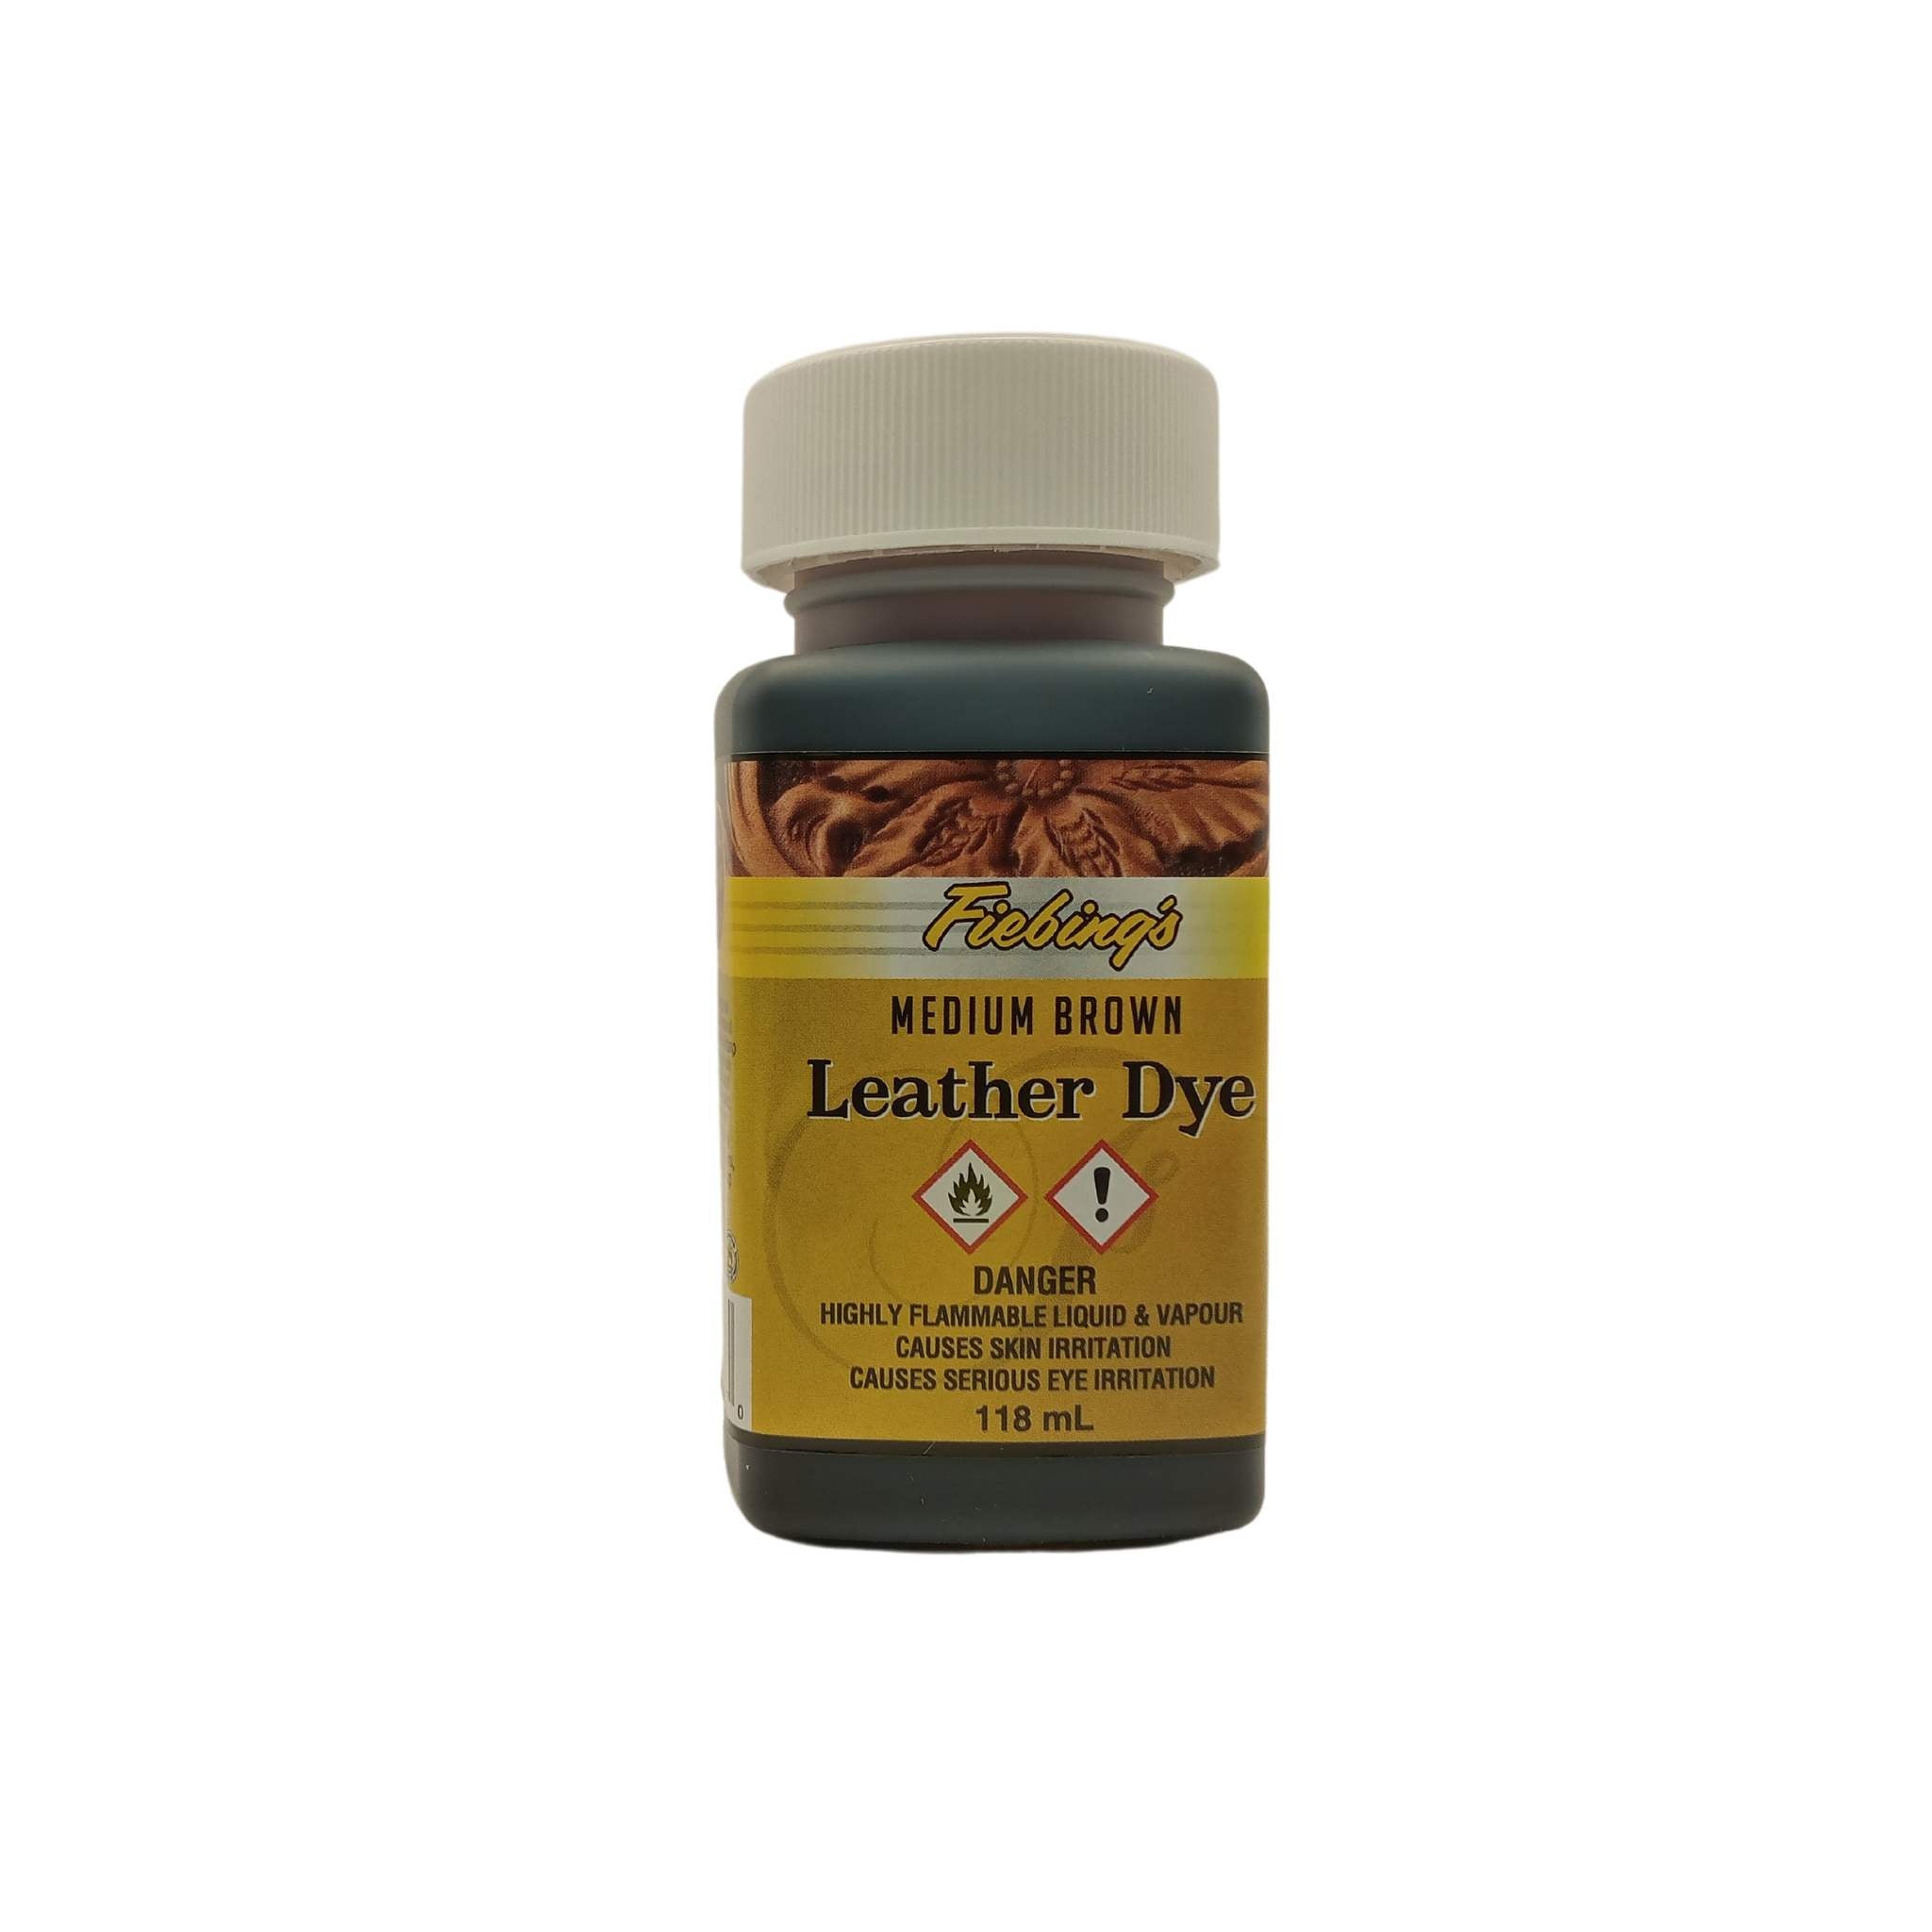 Dye your leathercraft projects with this Fiebing's solvent based leather dye - Medium Brown